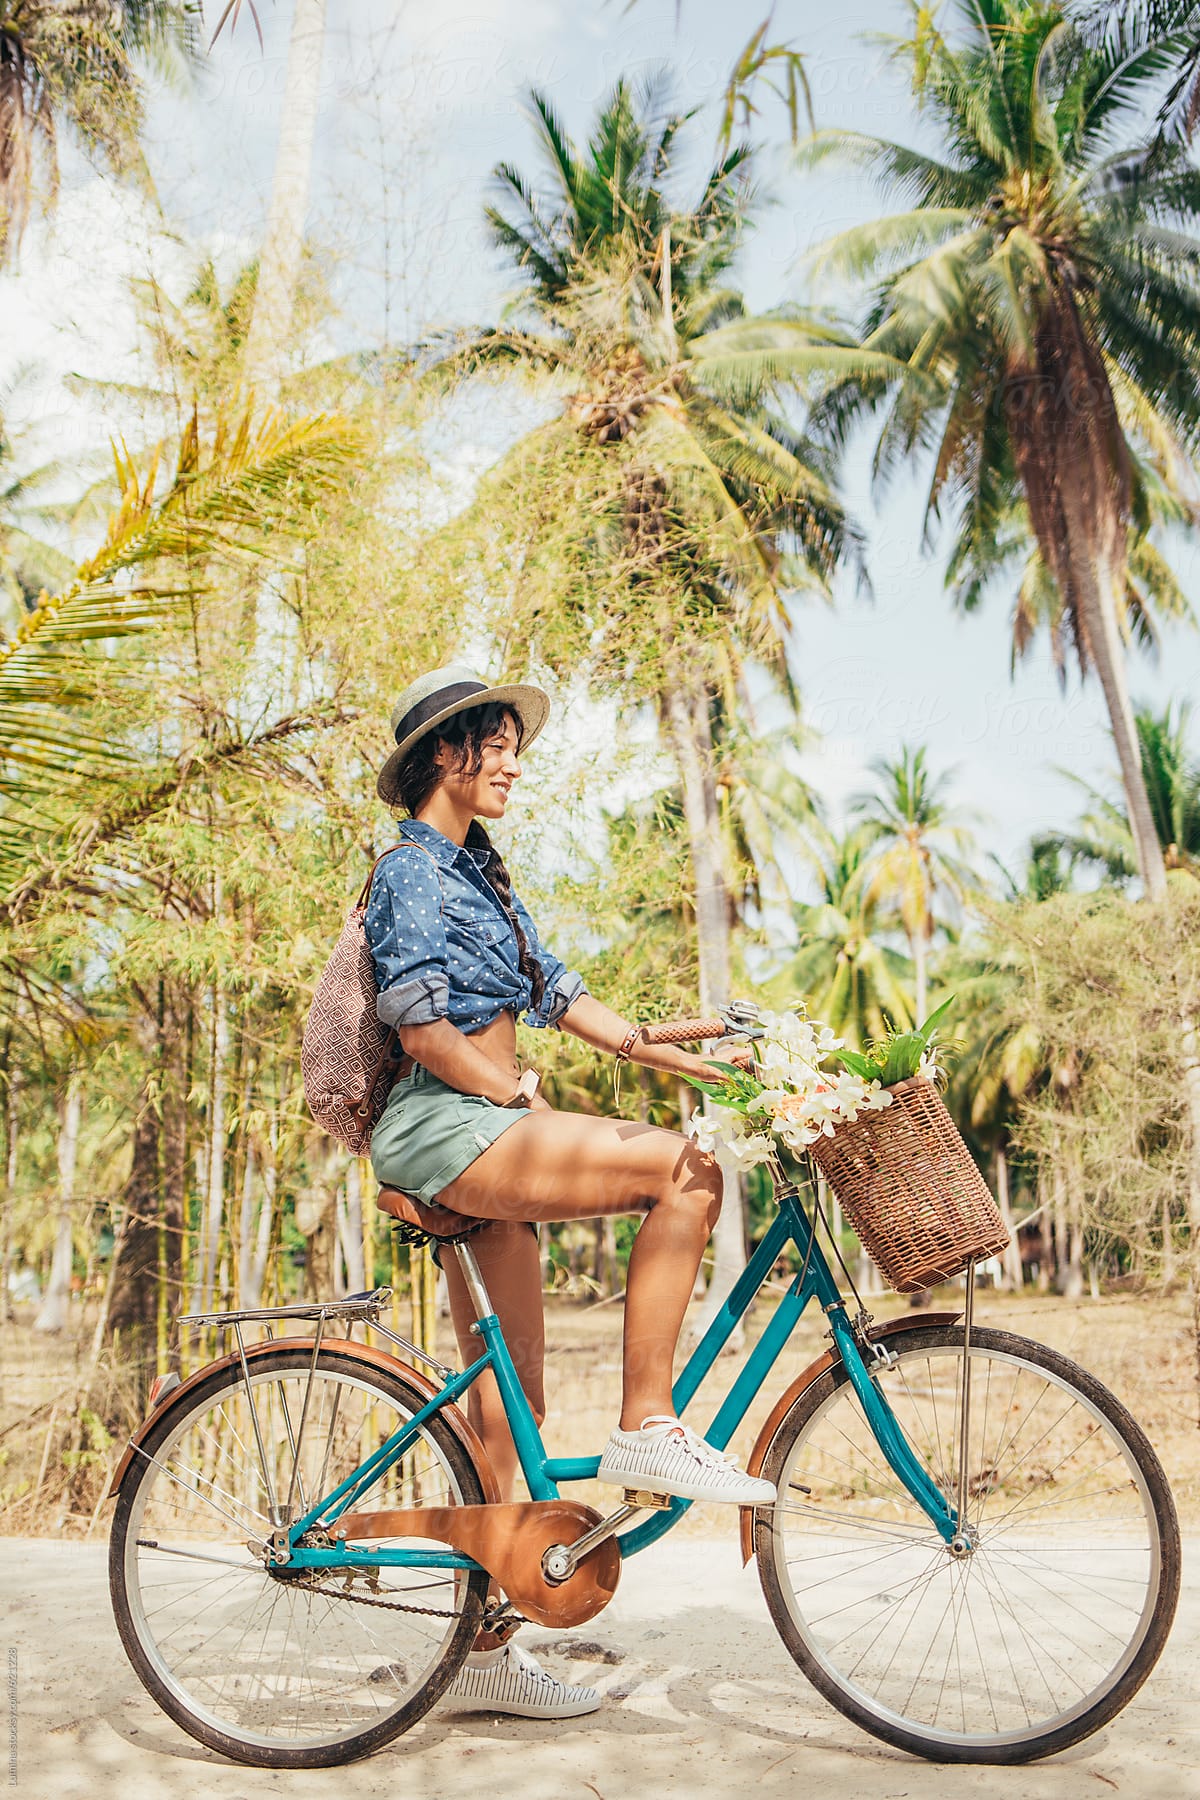 Happy Woman Riding a Bike in a Tropical Setting